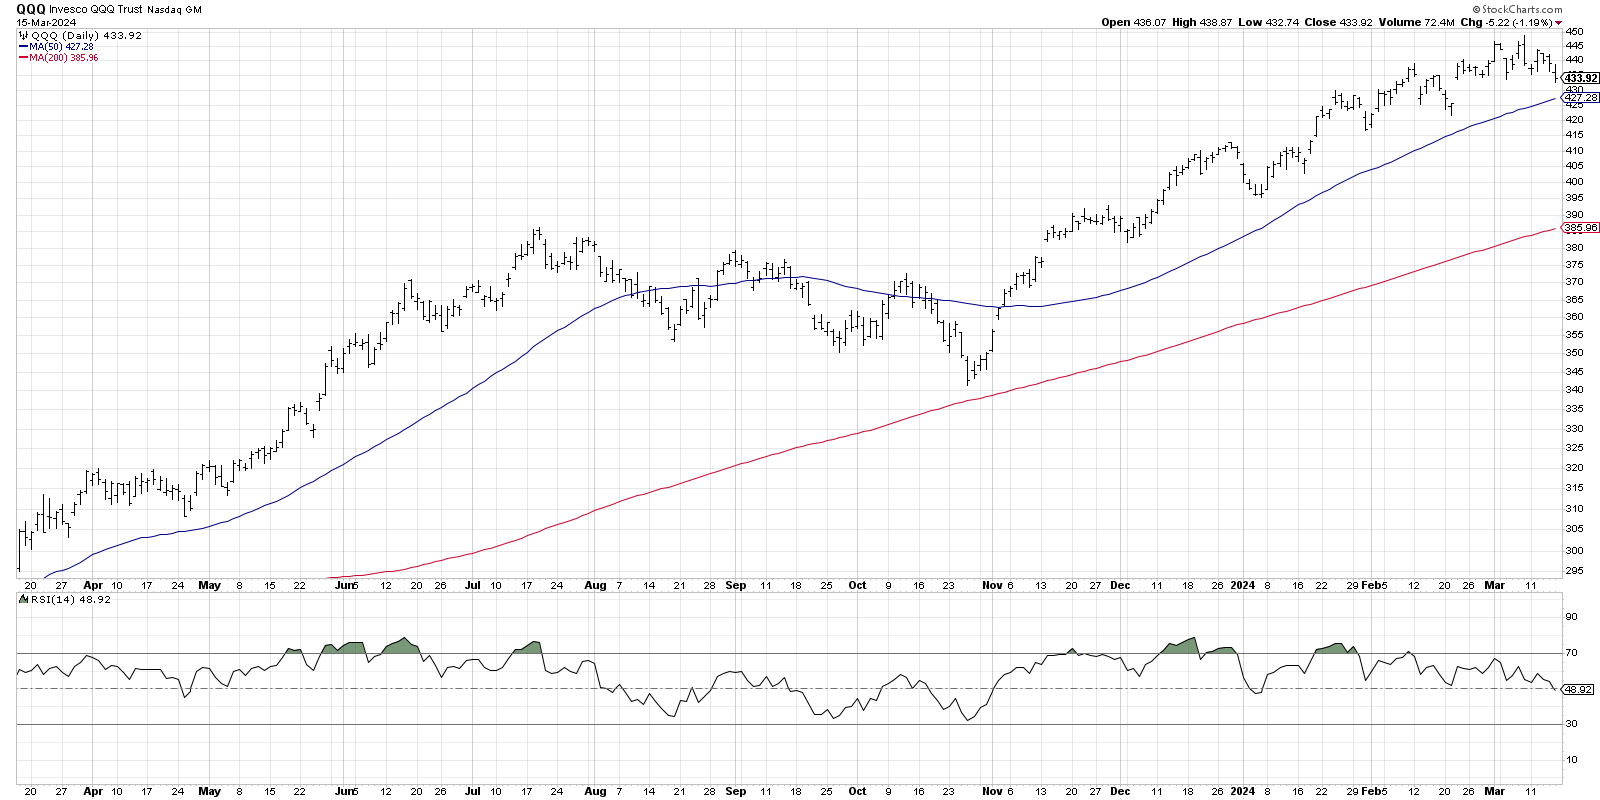 What's the Downside Risk for QQQ?